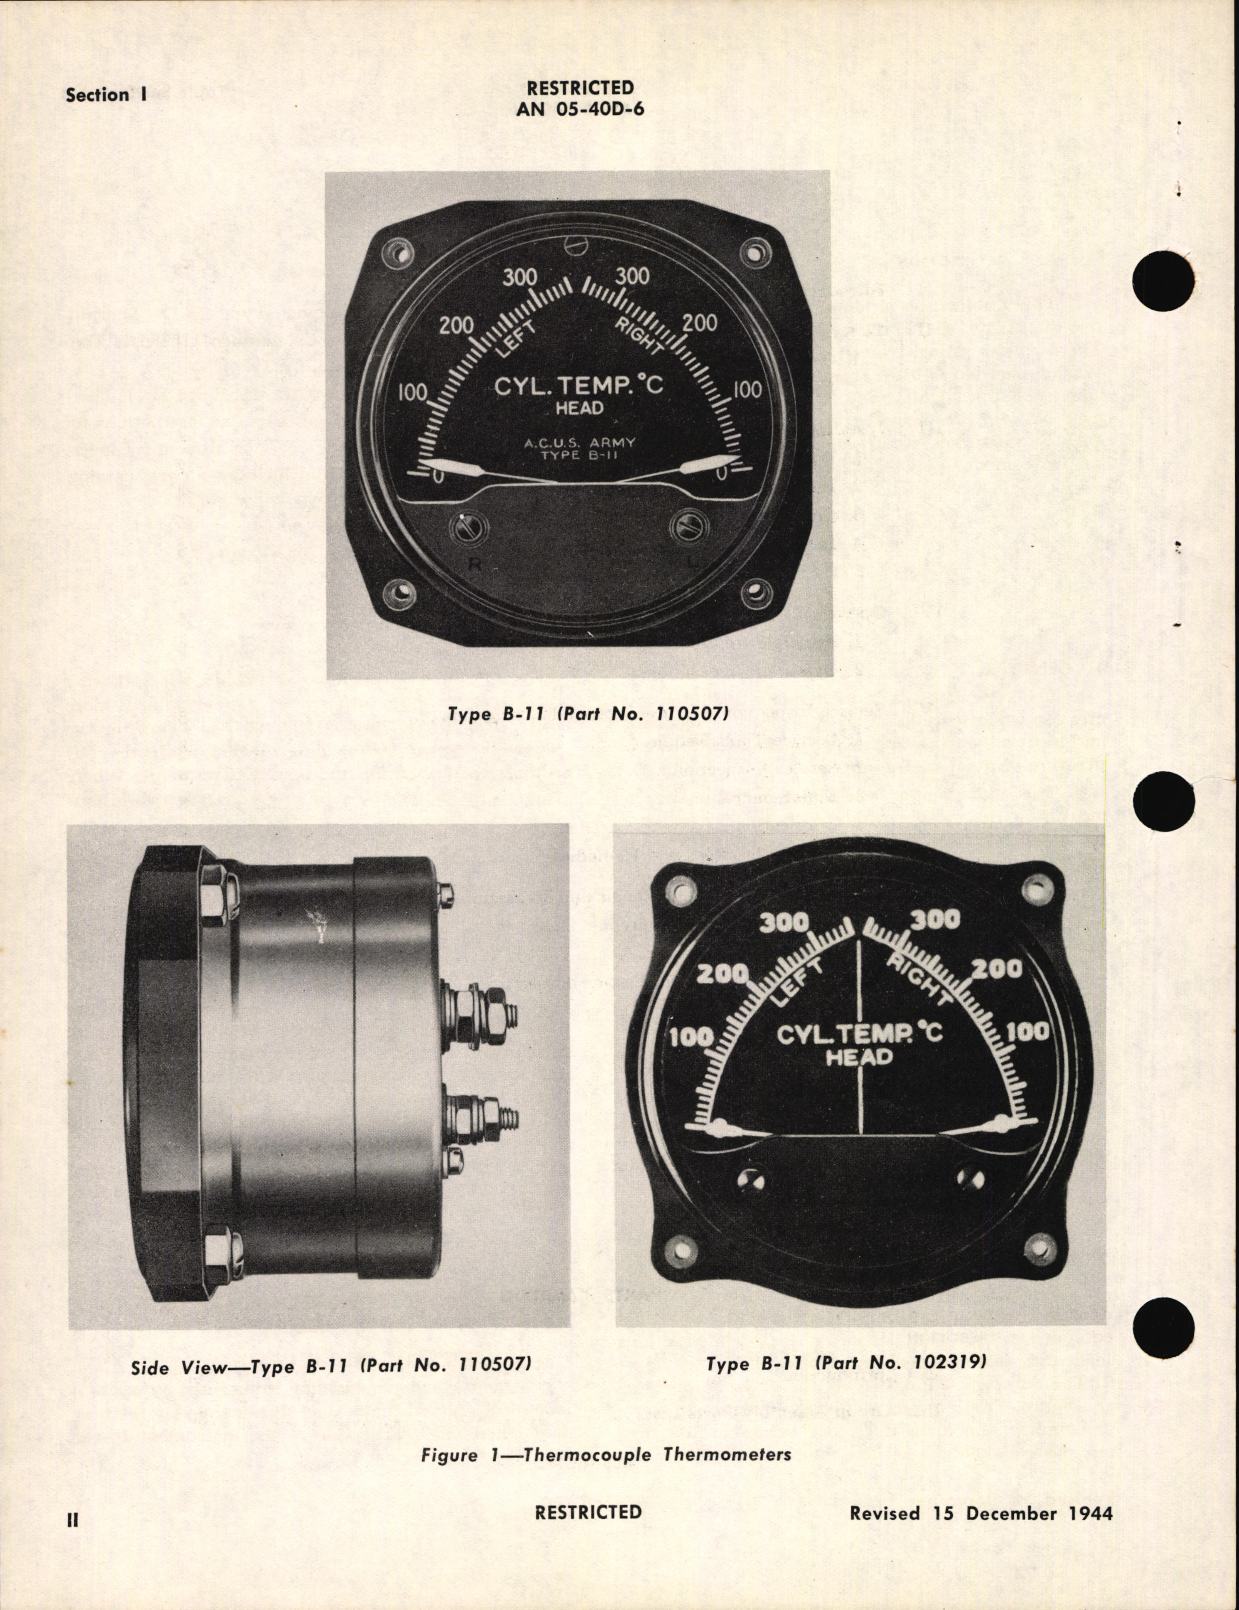 Sample page 6 from AirCorps Library document: Handbook of Instructions with Parts Catalog for Type B-11 and F.S.S.C. 88-I-2660 Thermocouple Thermometers